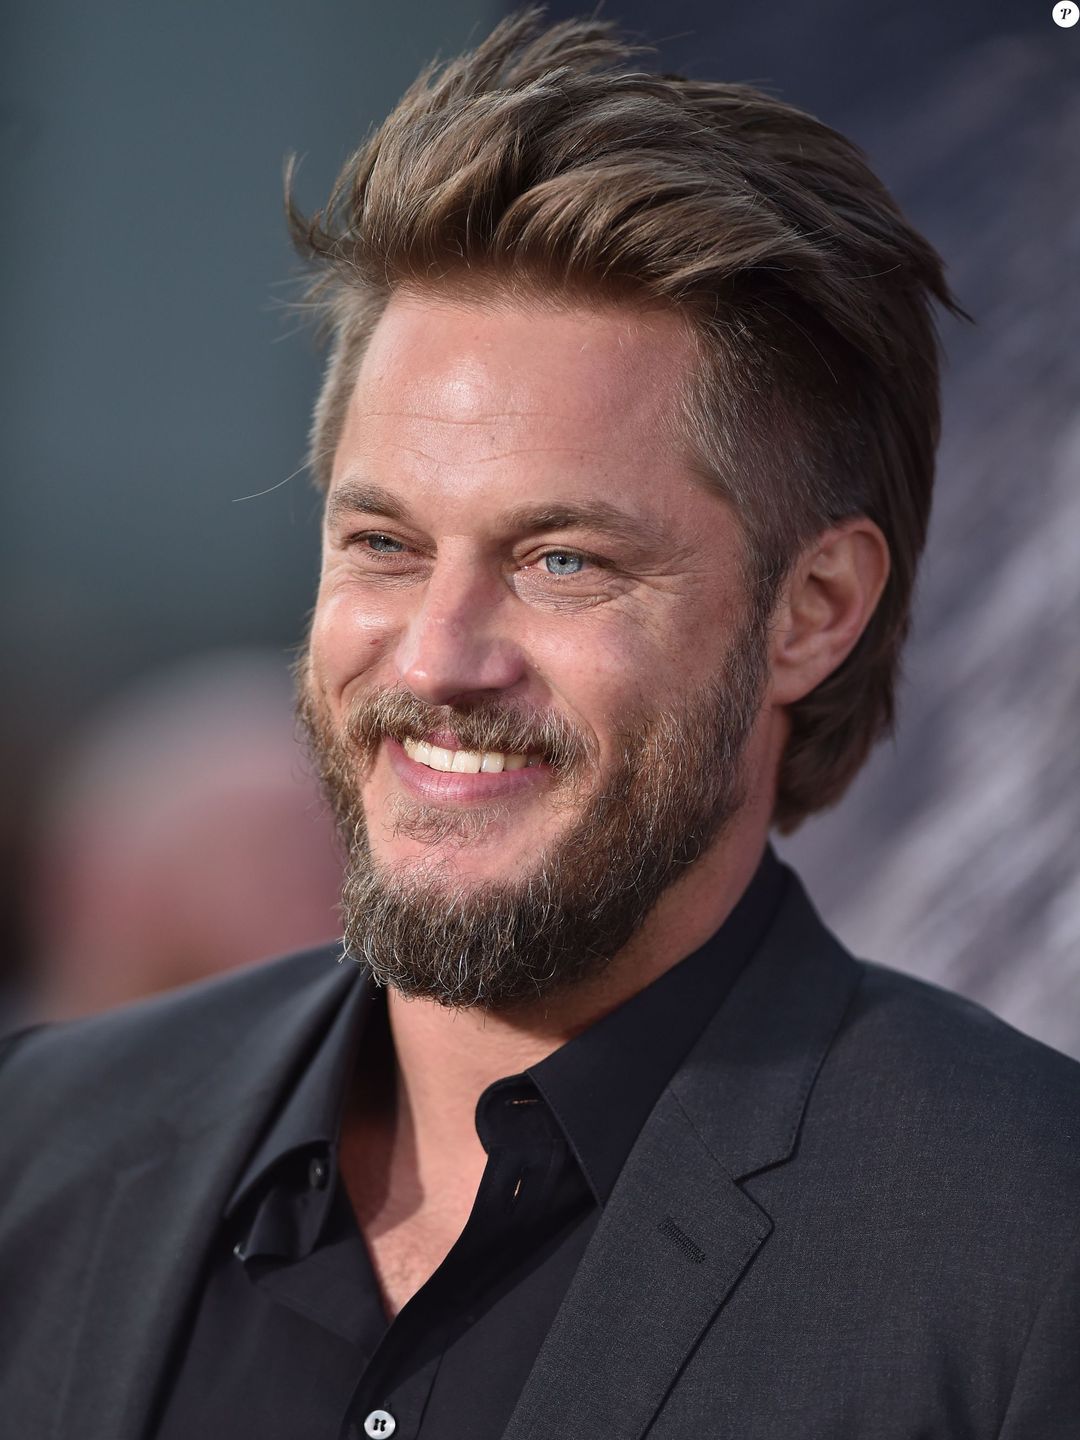 Travis Fimmel in real life